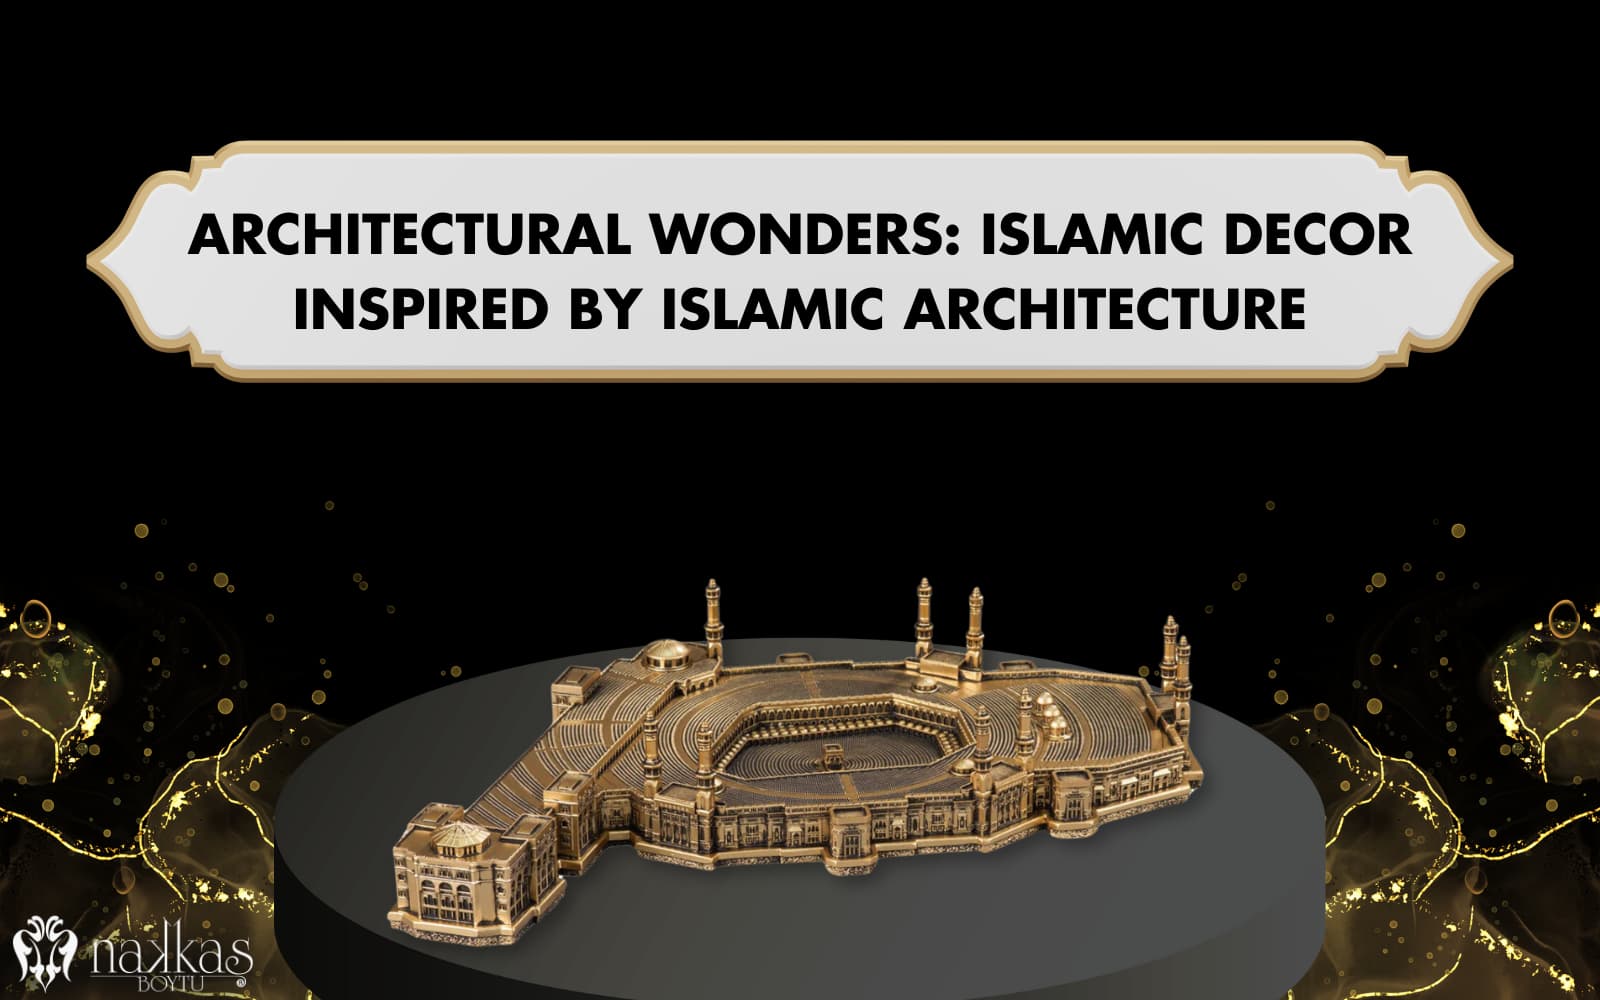 Architectural Wonders: Islamic Decor Inspired by Islamic Architecture